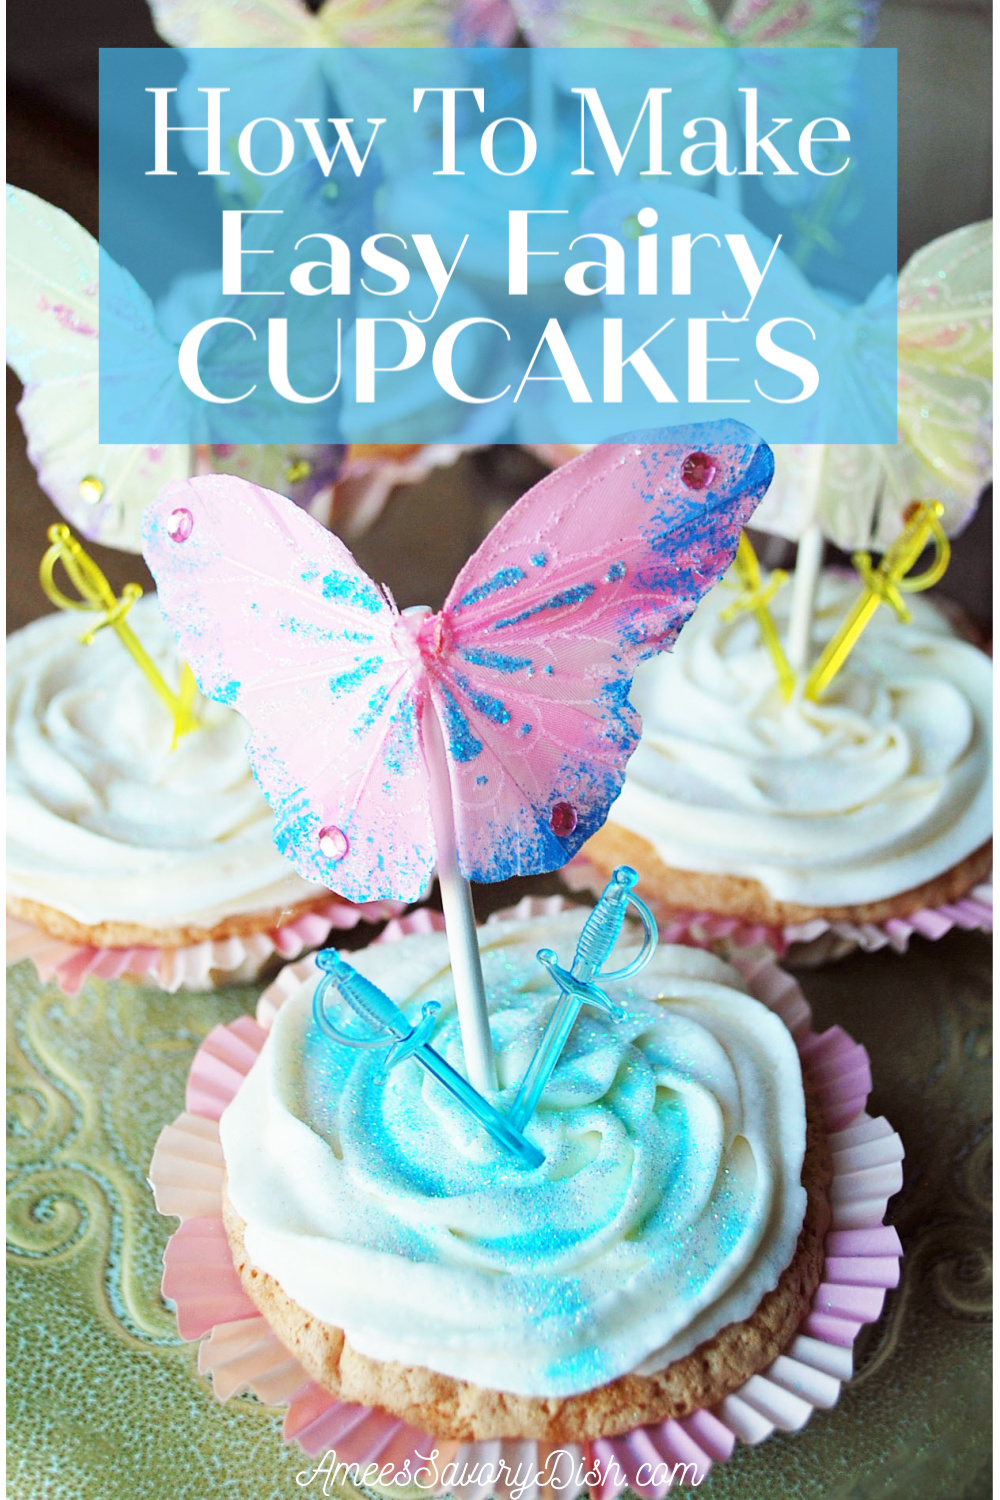 This easy frosting recipe is made with butter, milk, powdered sugar, meringue powder, and vanilla and almond extract.  So good on all your favorite cake and cupcake recipes! Also, learn how to make adorable and easy Fairy and Pirate themed cupcakes! via @Ameessavorydish